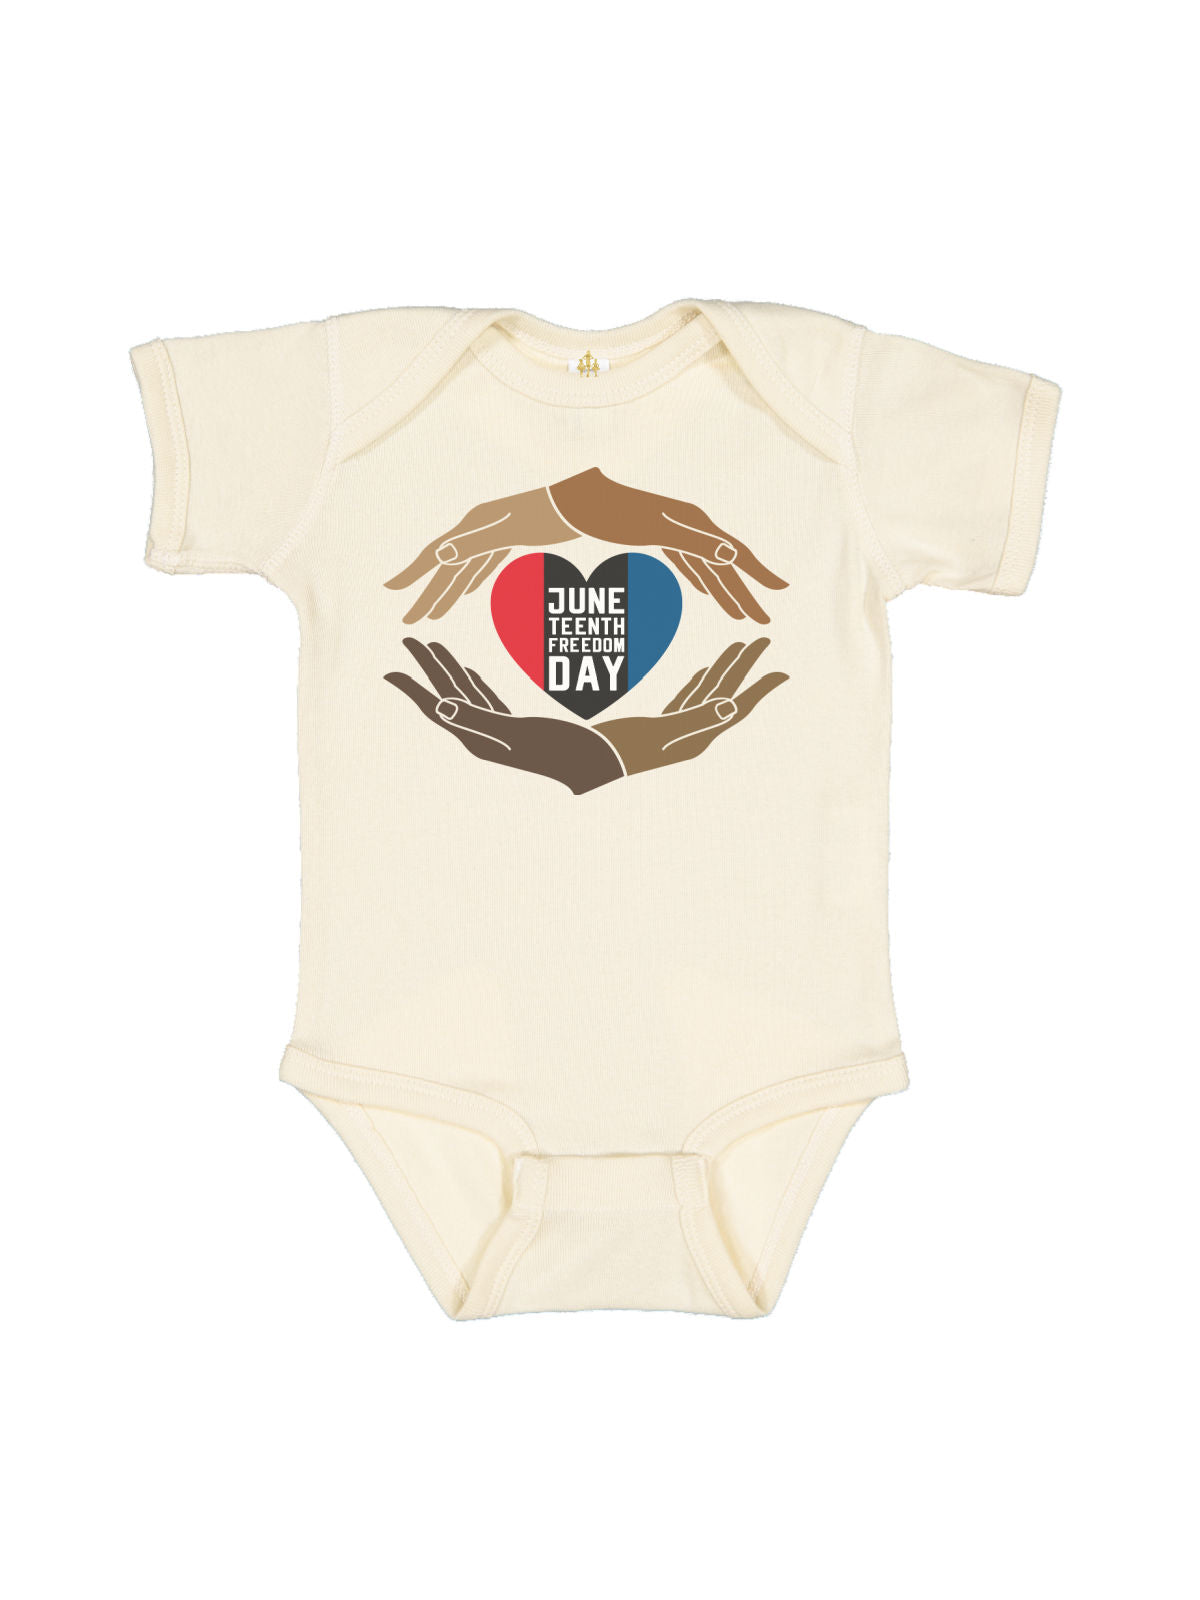 Hands of Juneteenth Freedom Day Natural Baby Bodysuit